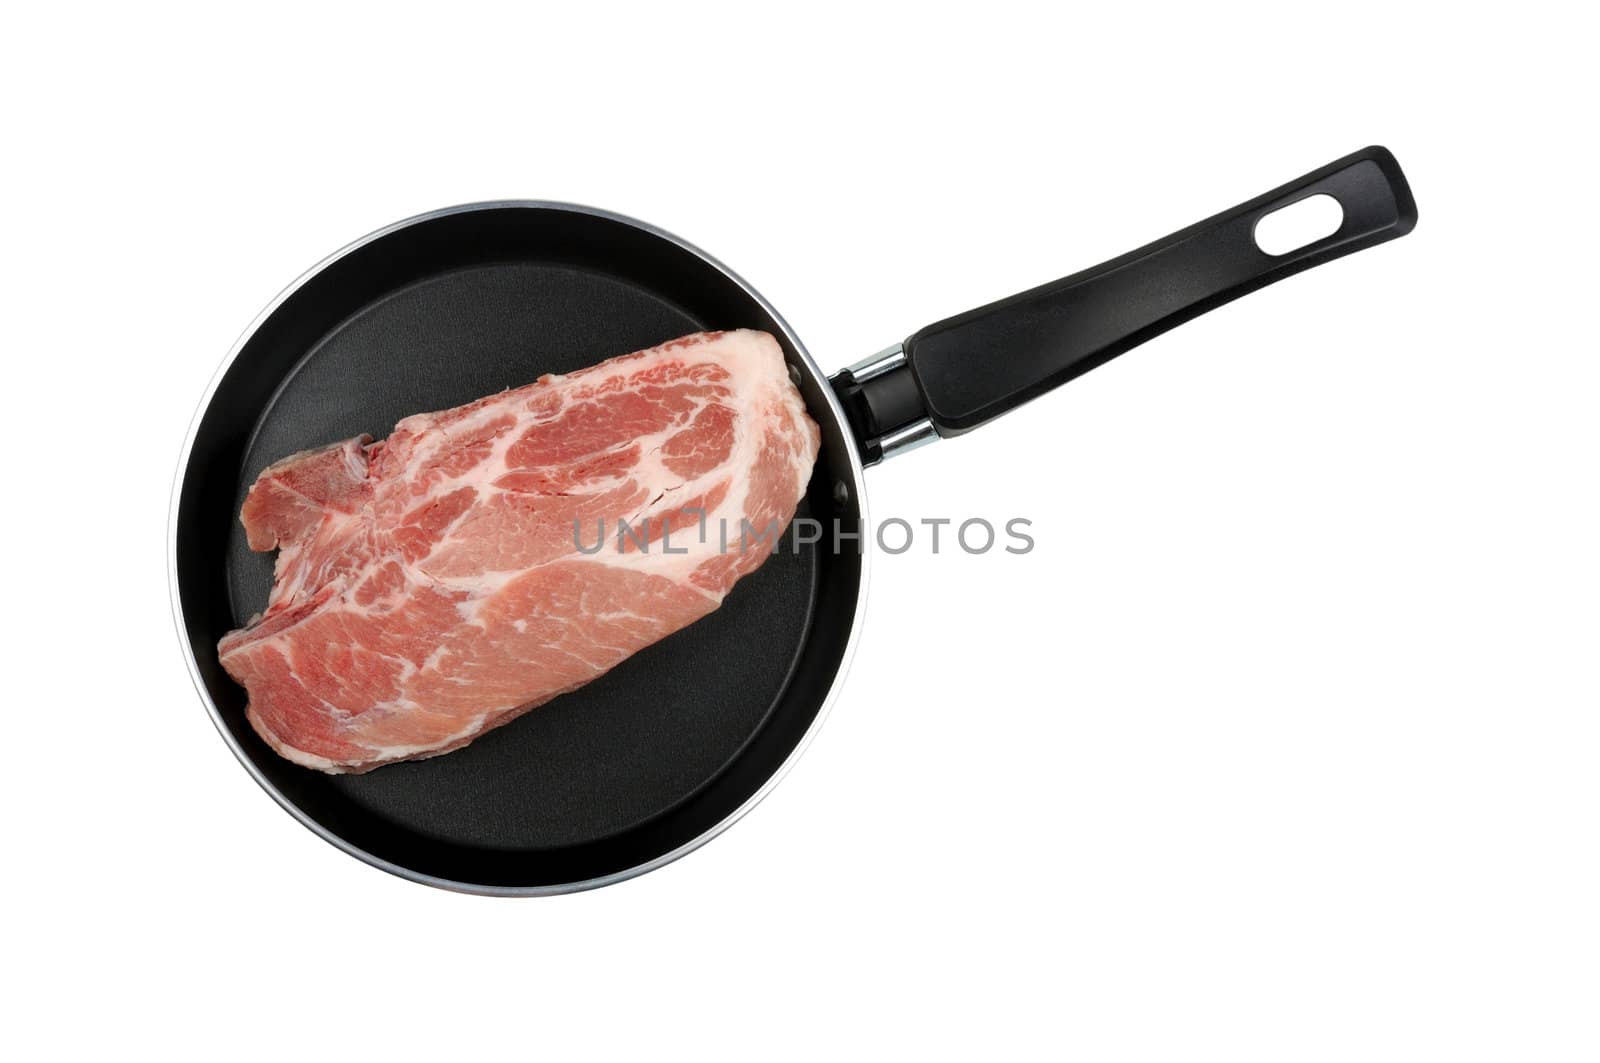 piece of raw meat in a frying pan isolated on white background